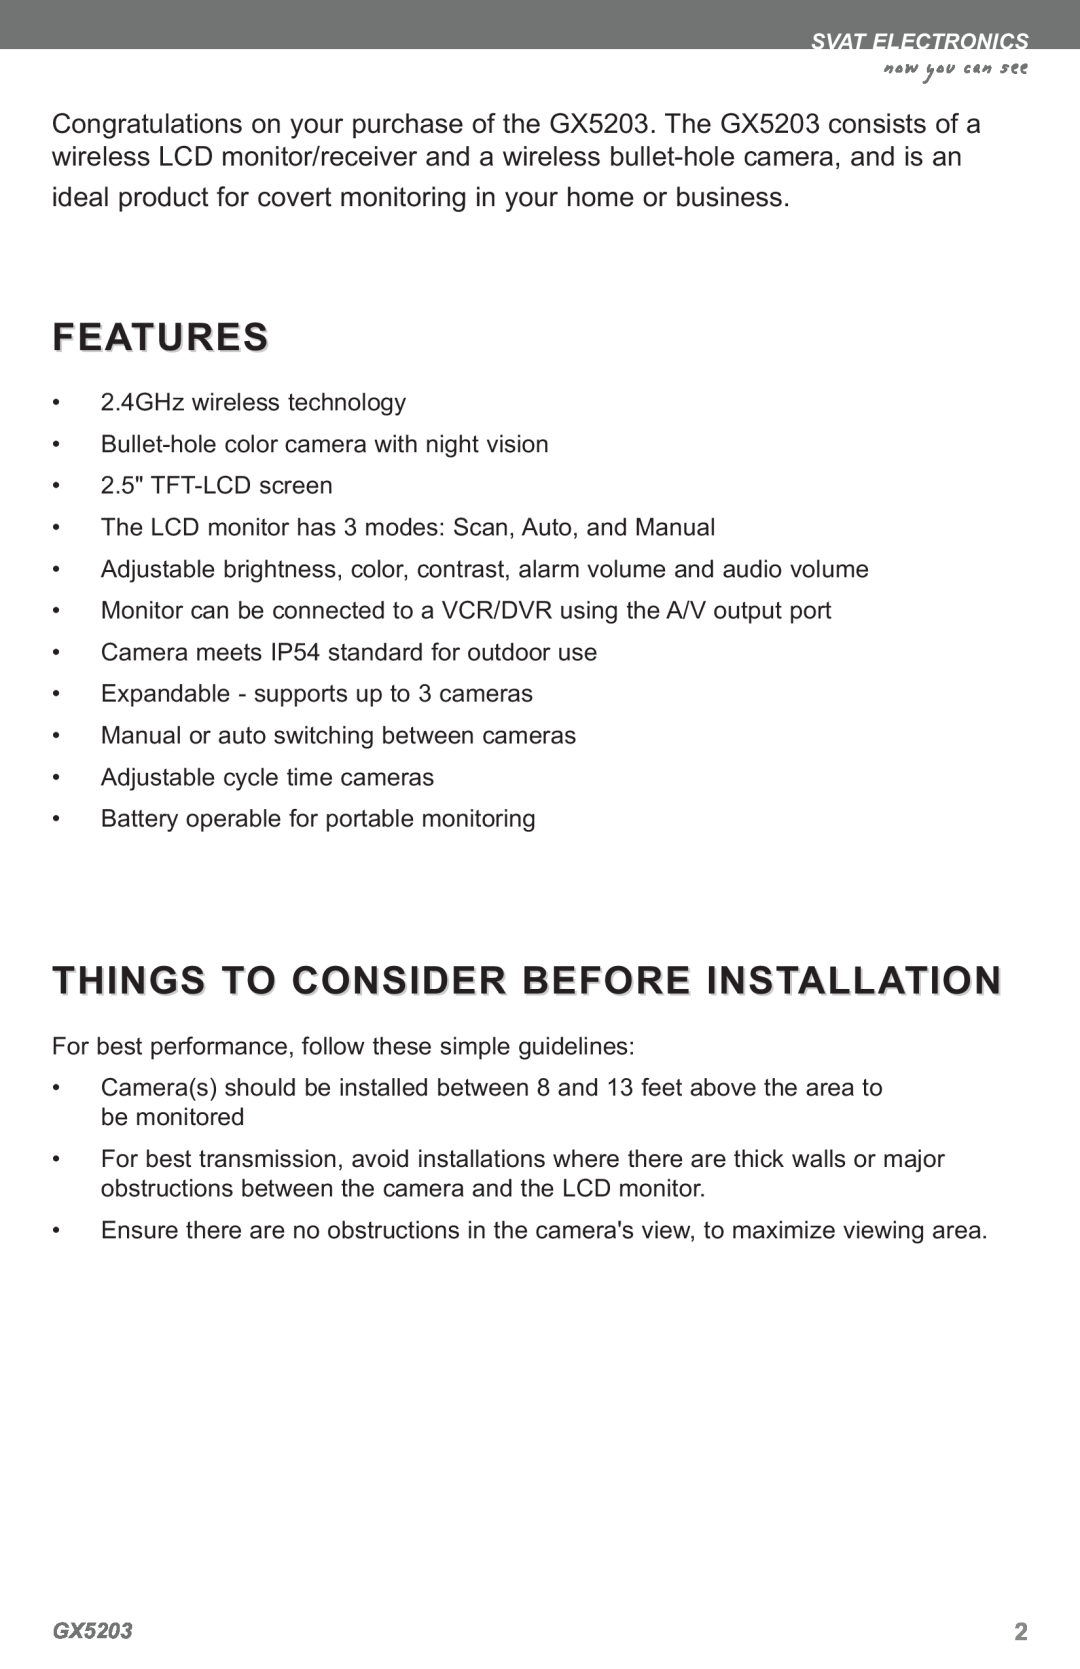 SVAT Electronics GX5203 instruction manual Features, Things To Consider Before Installation, now you can see 